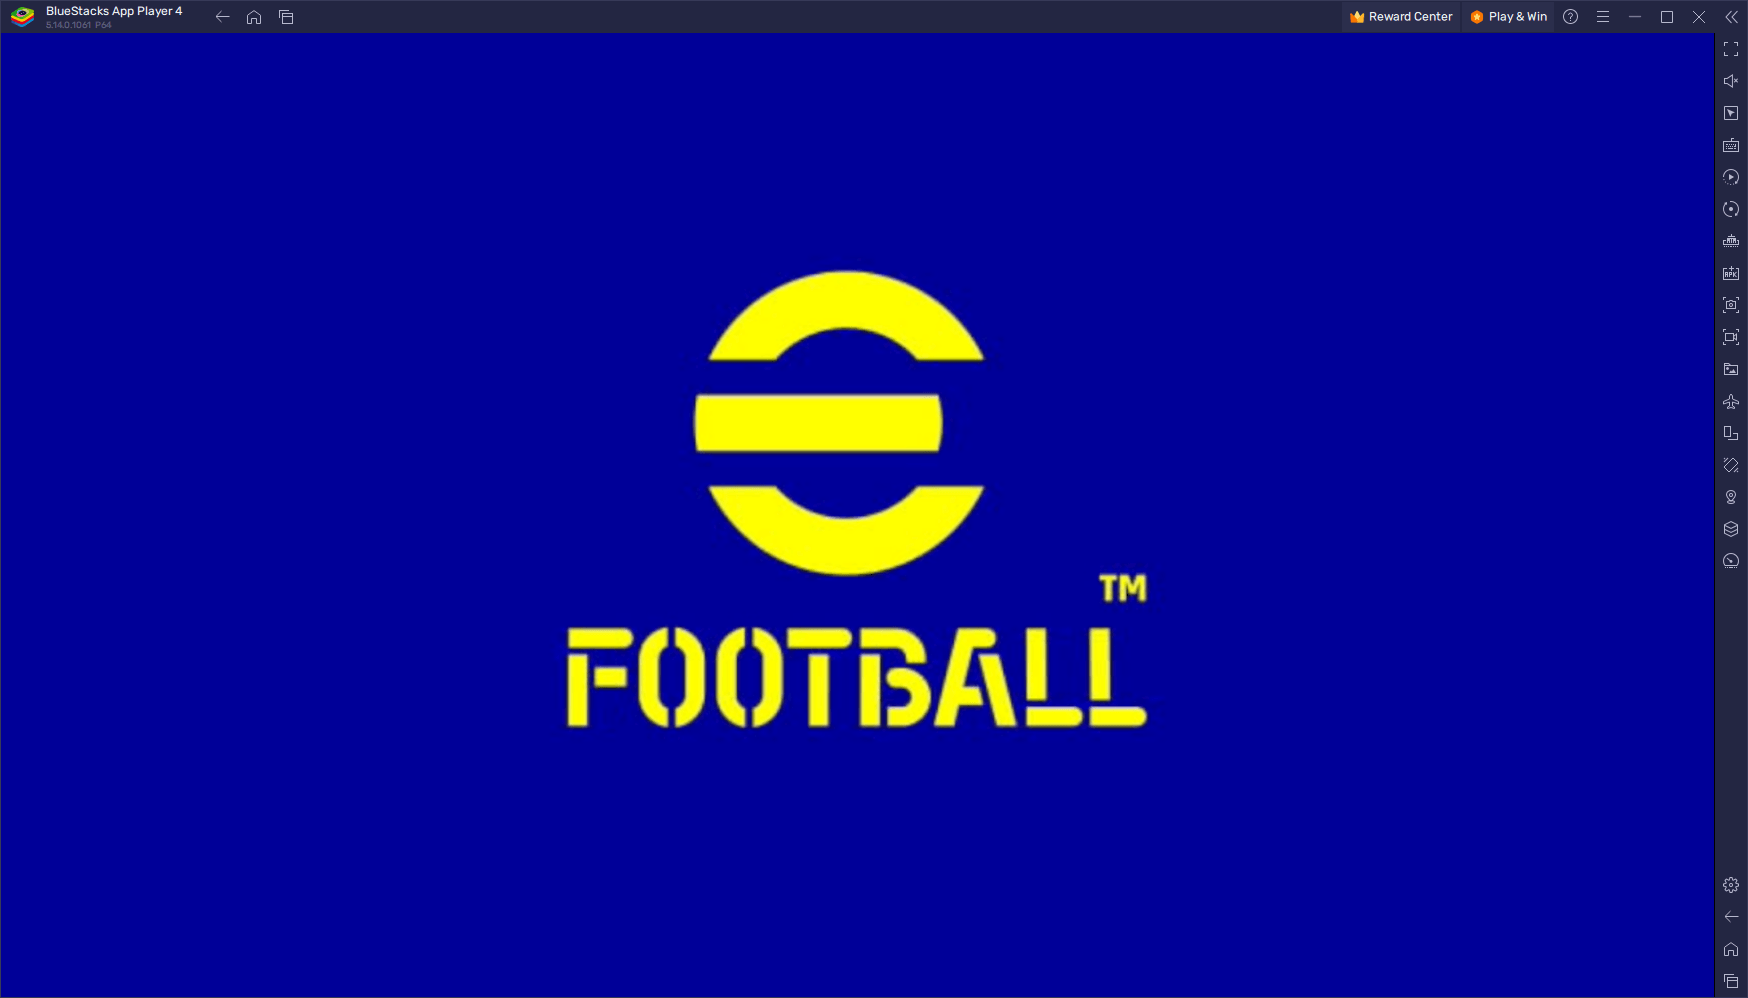 Play eFootball 2024 on PC with Gamepad – BlueStacks Setup Guide